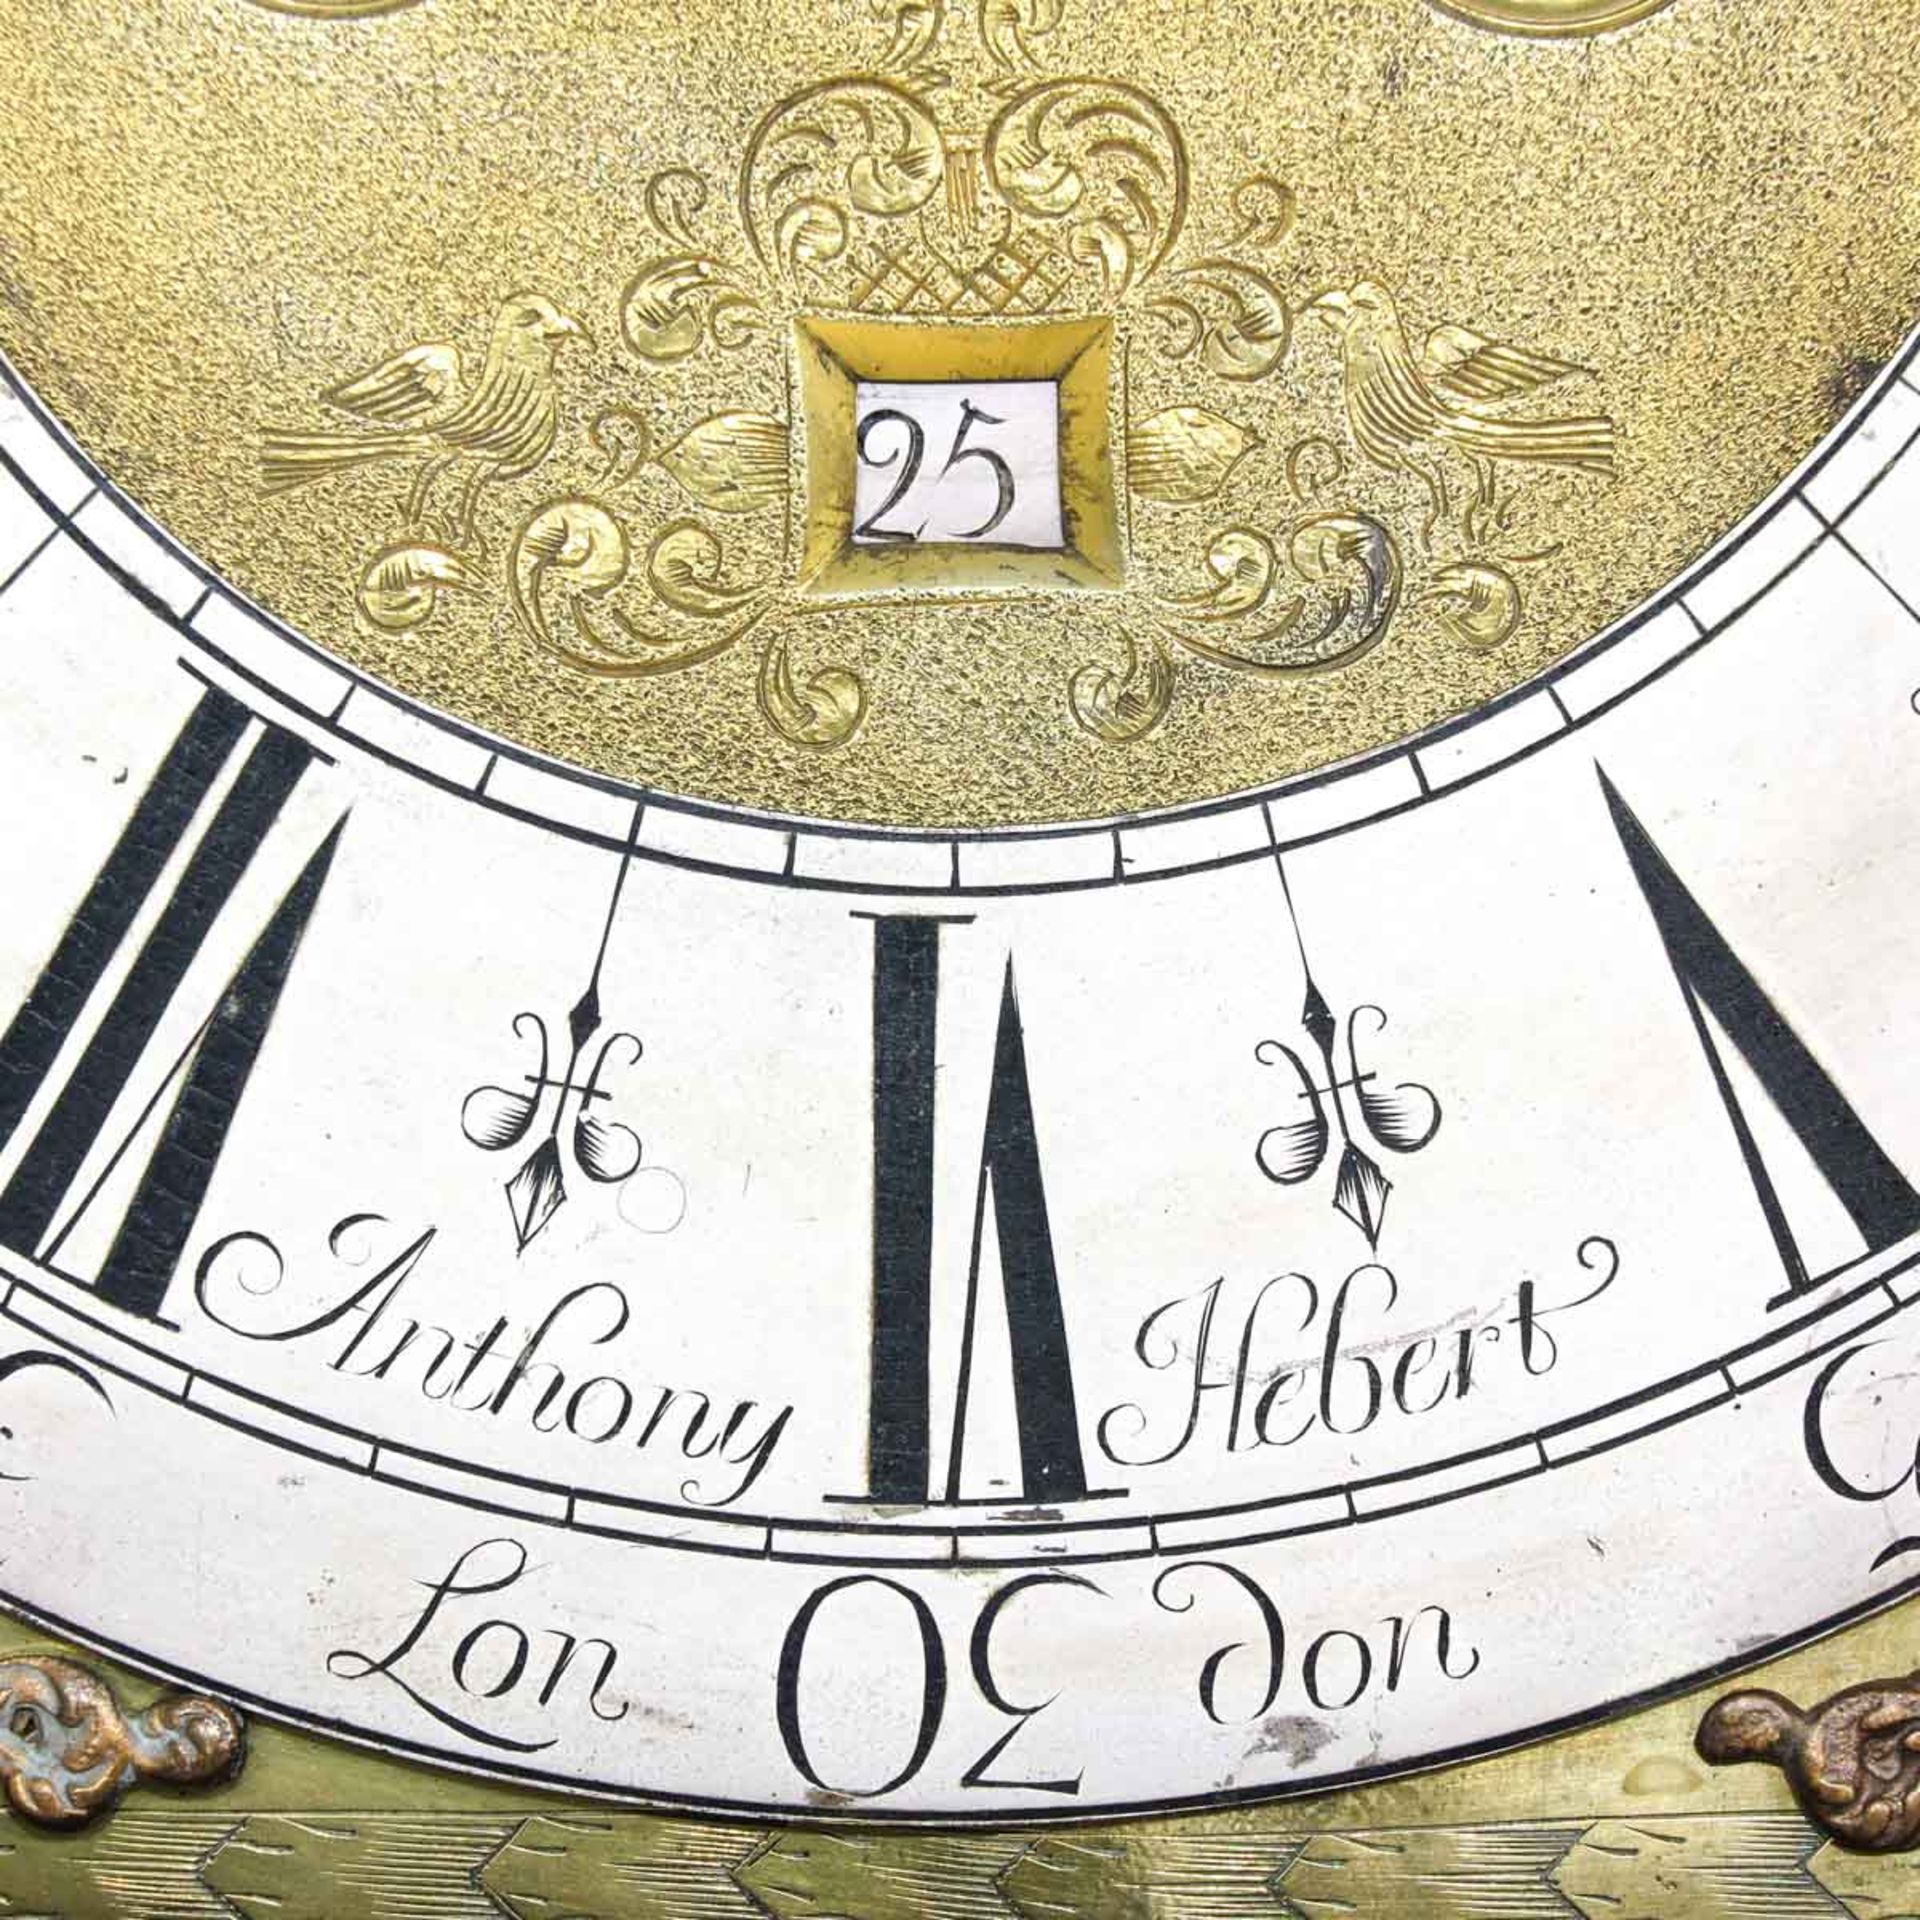 A Standing Clock Signed Anthony Herbert London Circa 1710 - Image 6 of 10